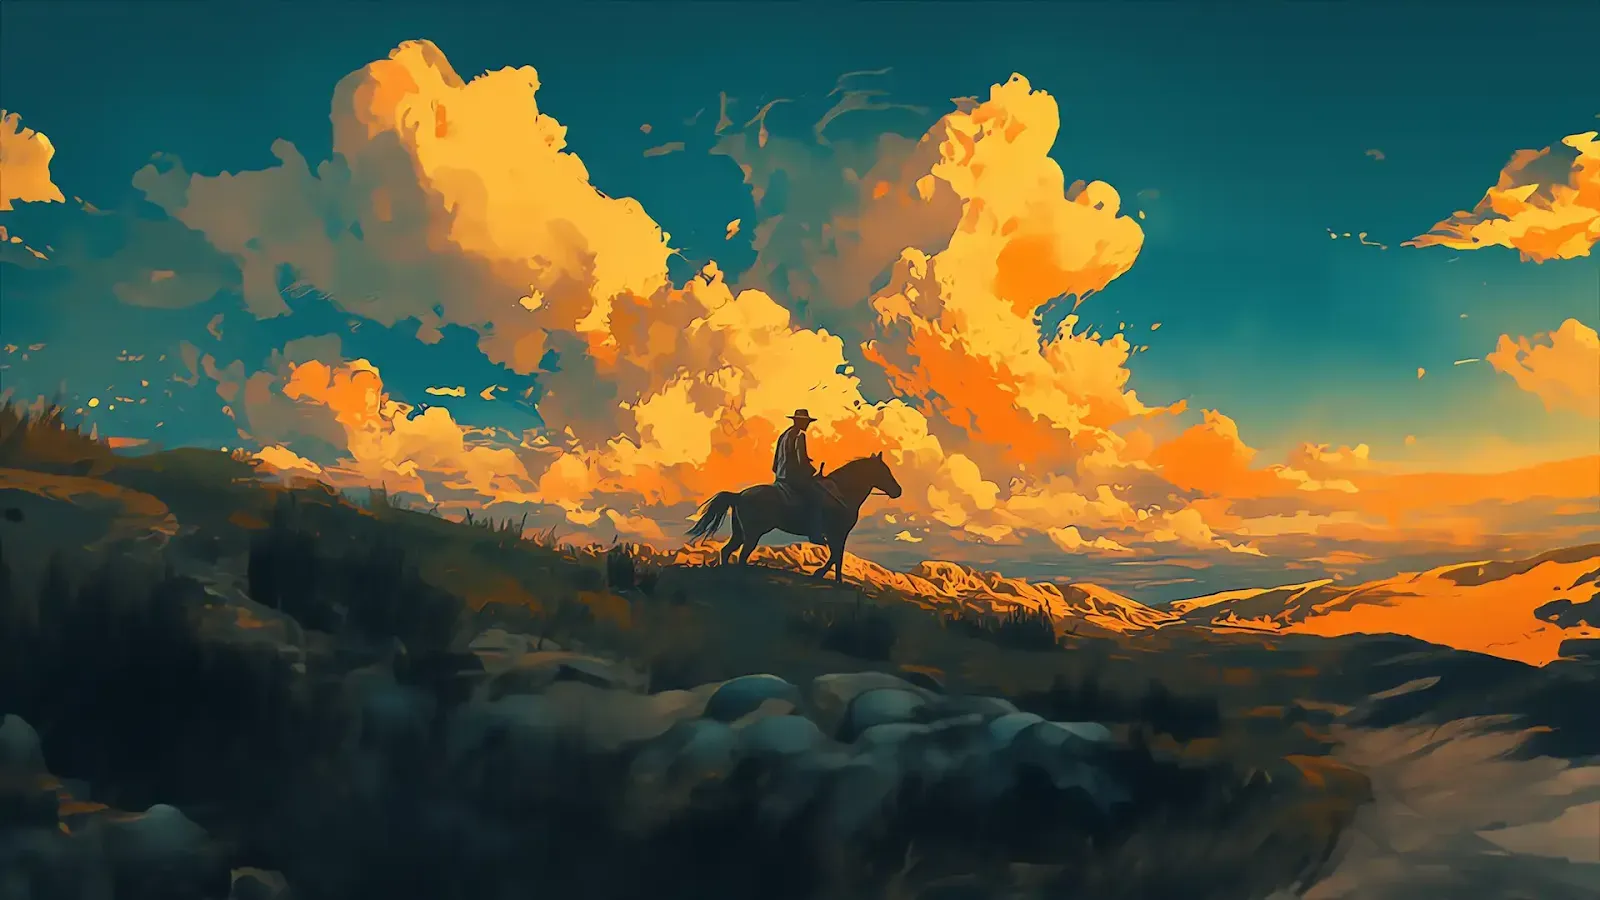 toplist wallpaper. Silhouette of a lone rider on horseback atop a hill against a backdrop of stunning golden clouds at sunset, in a Western-style landscape.